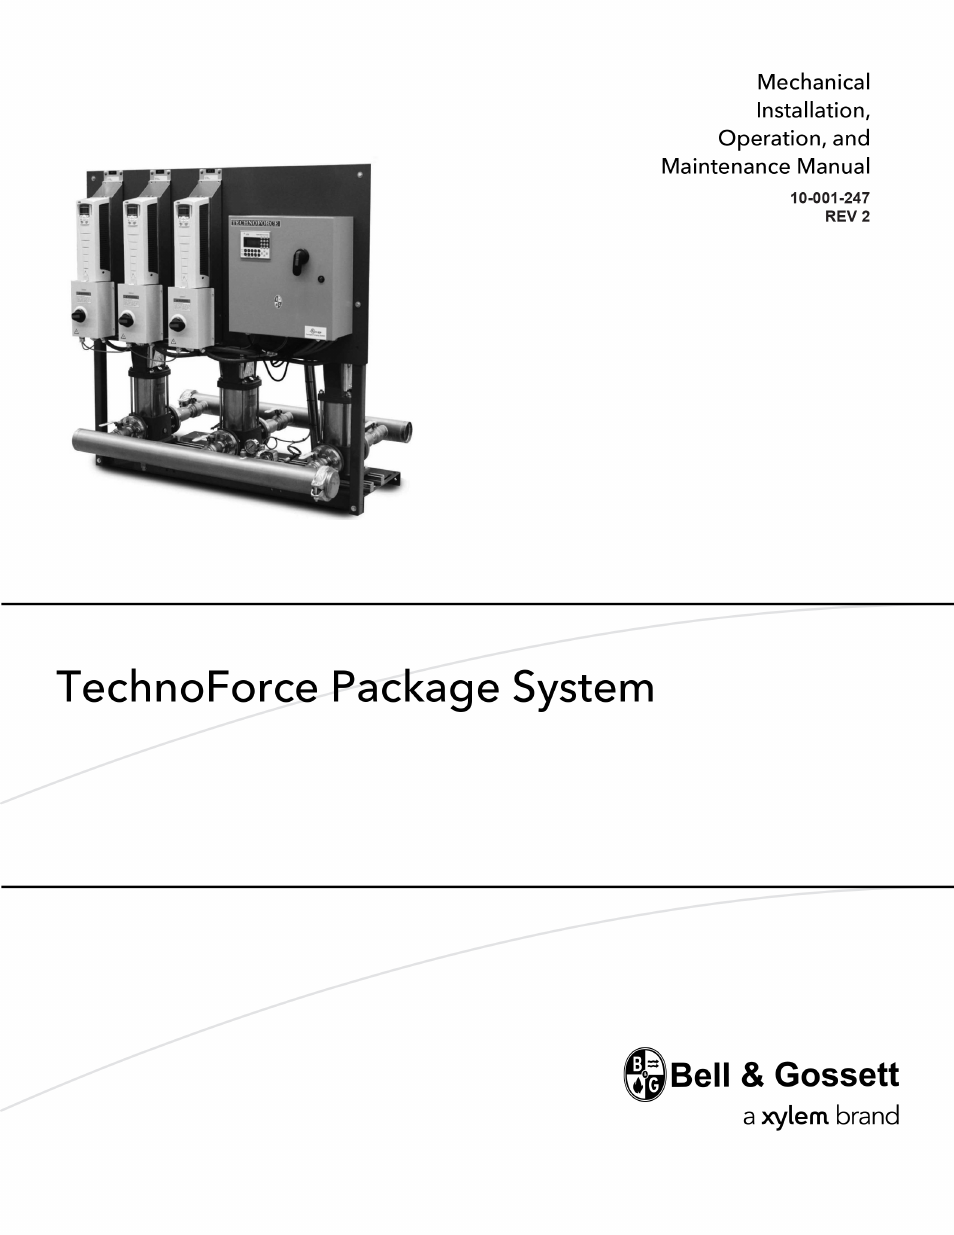 10 001 247 R2 TechnoForce Package System